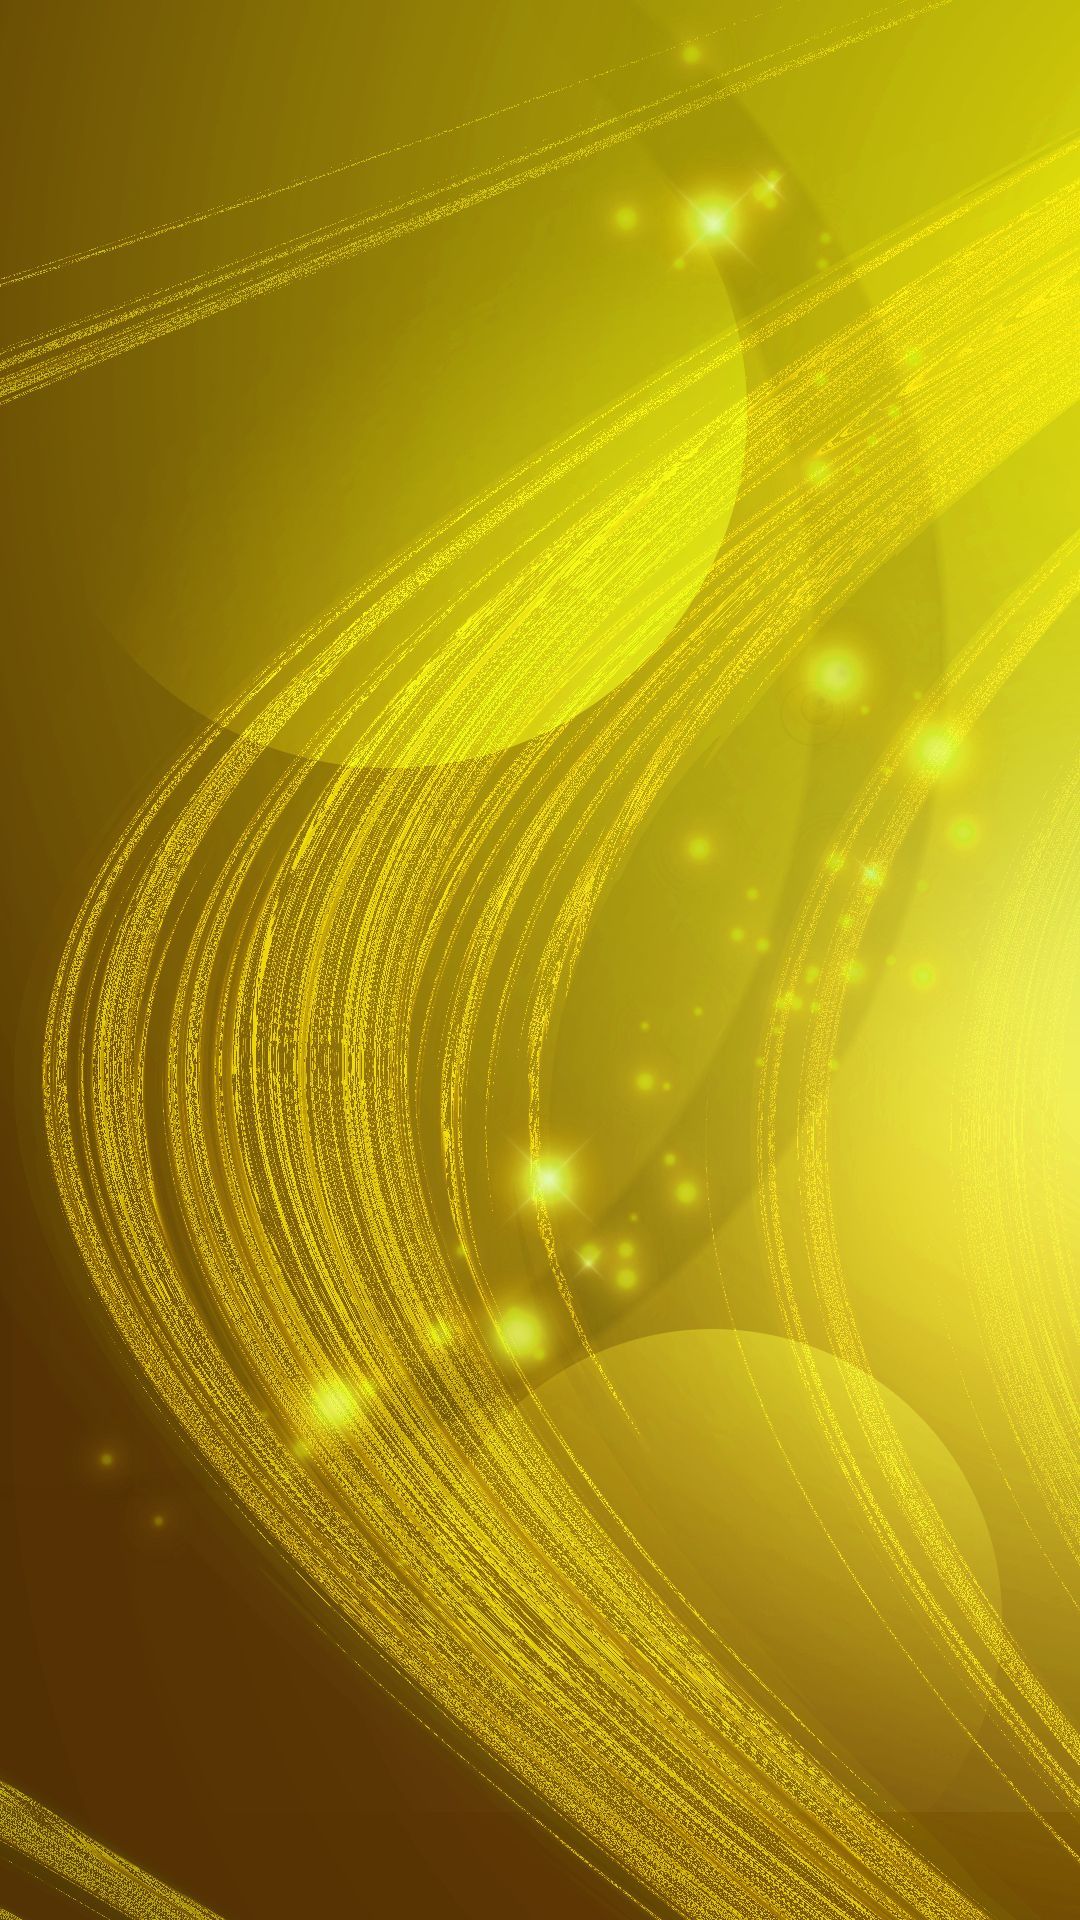 Abstract Wallpaper Background Yellow Gradient And Stars, 1080*1920 (9 16) Flexible. #wallpape. Abstract Wallpaper Background, Abstract Wallpaper, Green And Gold